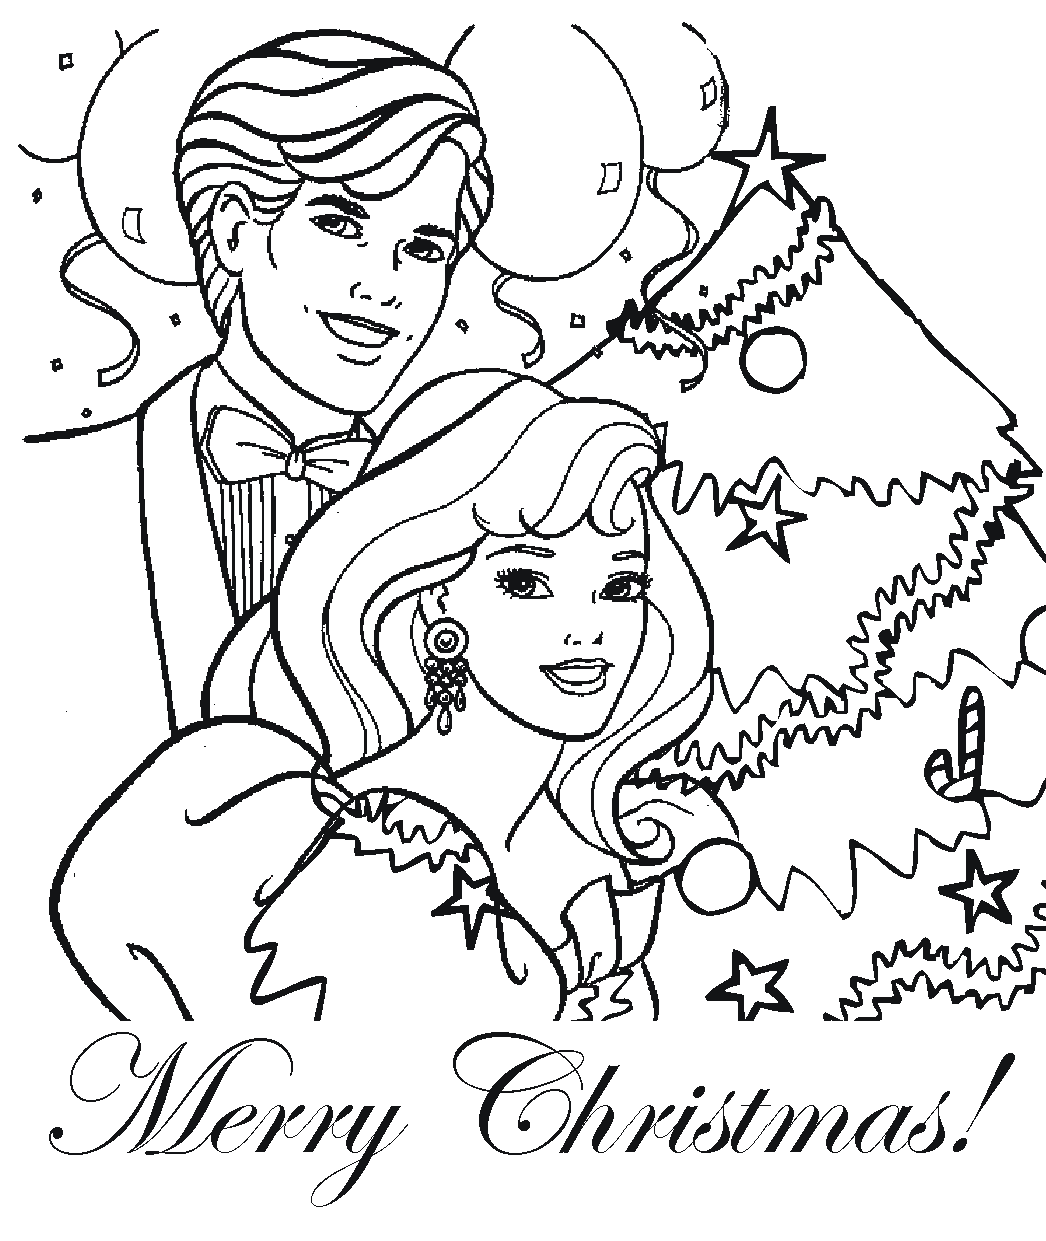 BARBIE COLORING PAGES: BARBIE CHRISTMAS COLORING PAGE